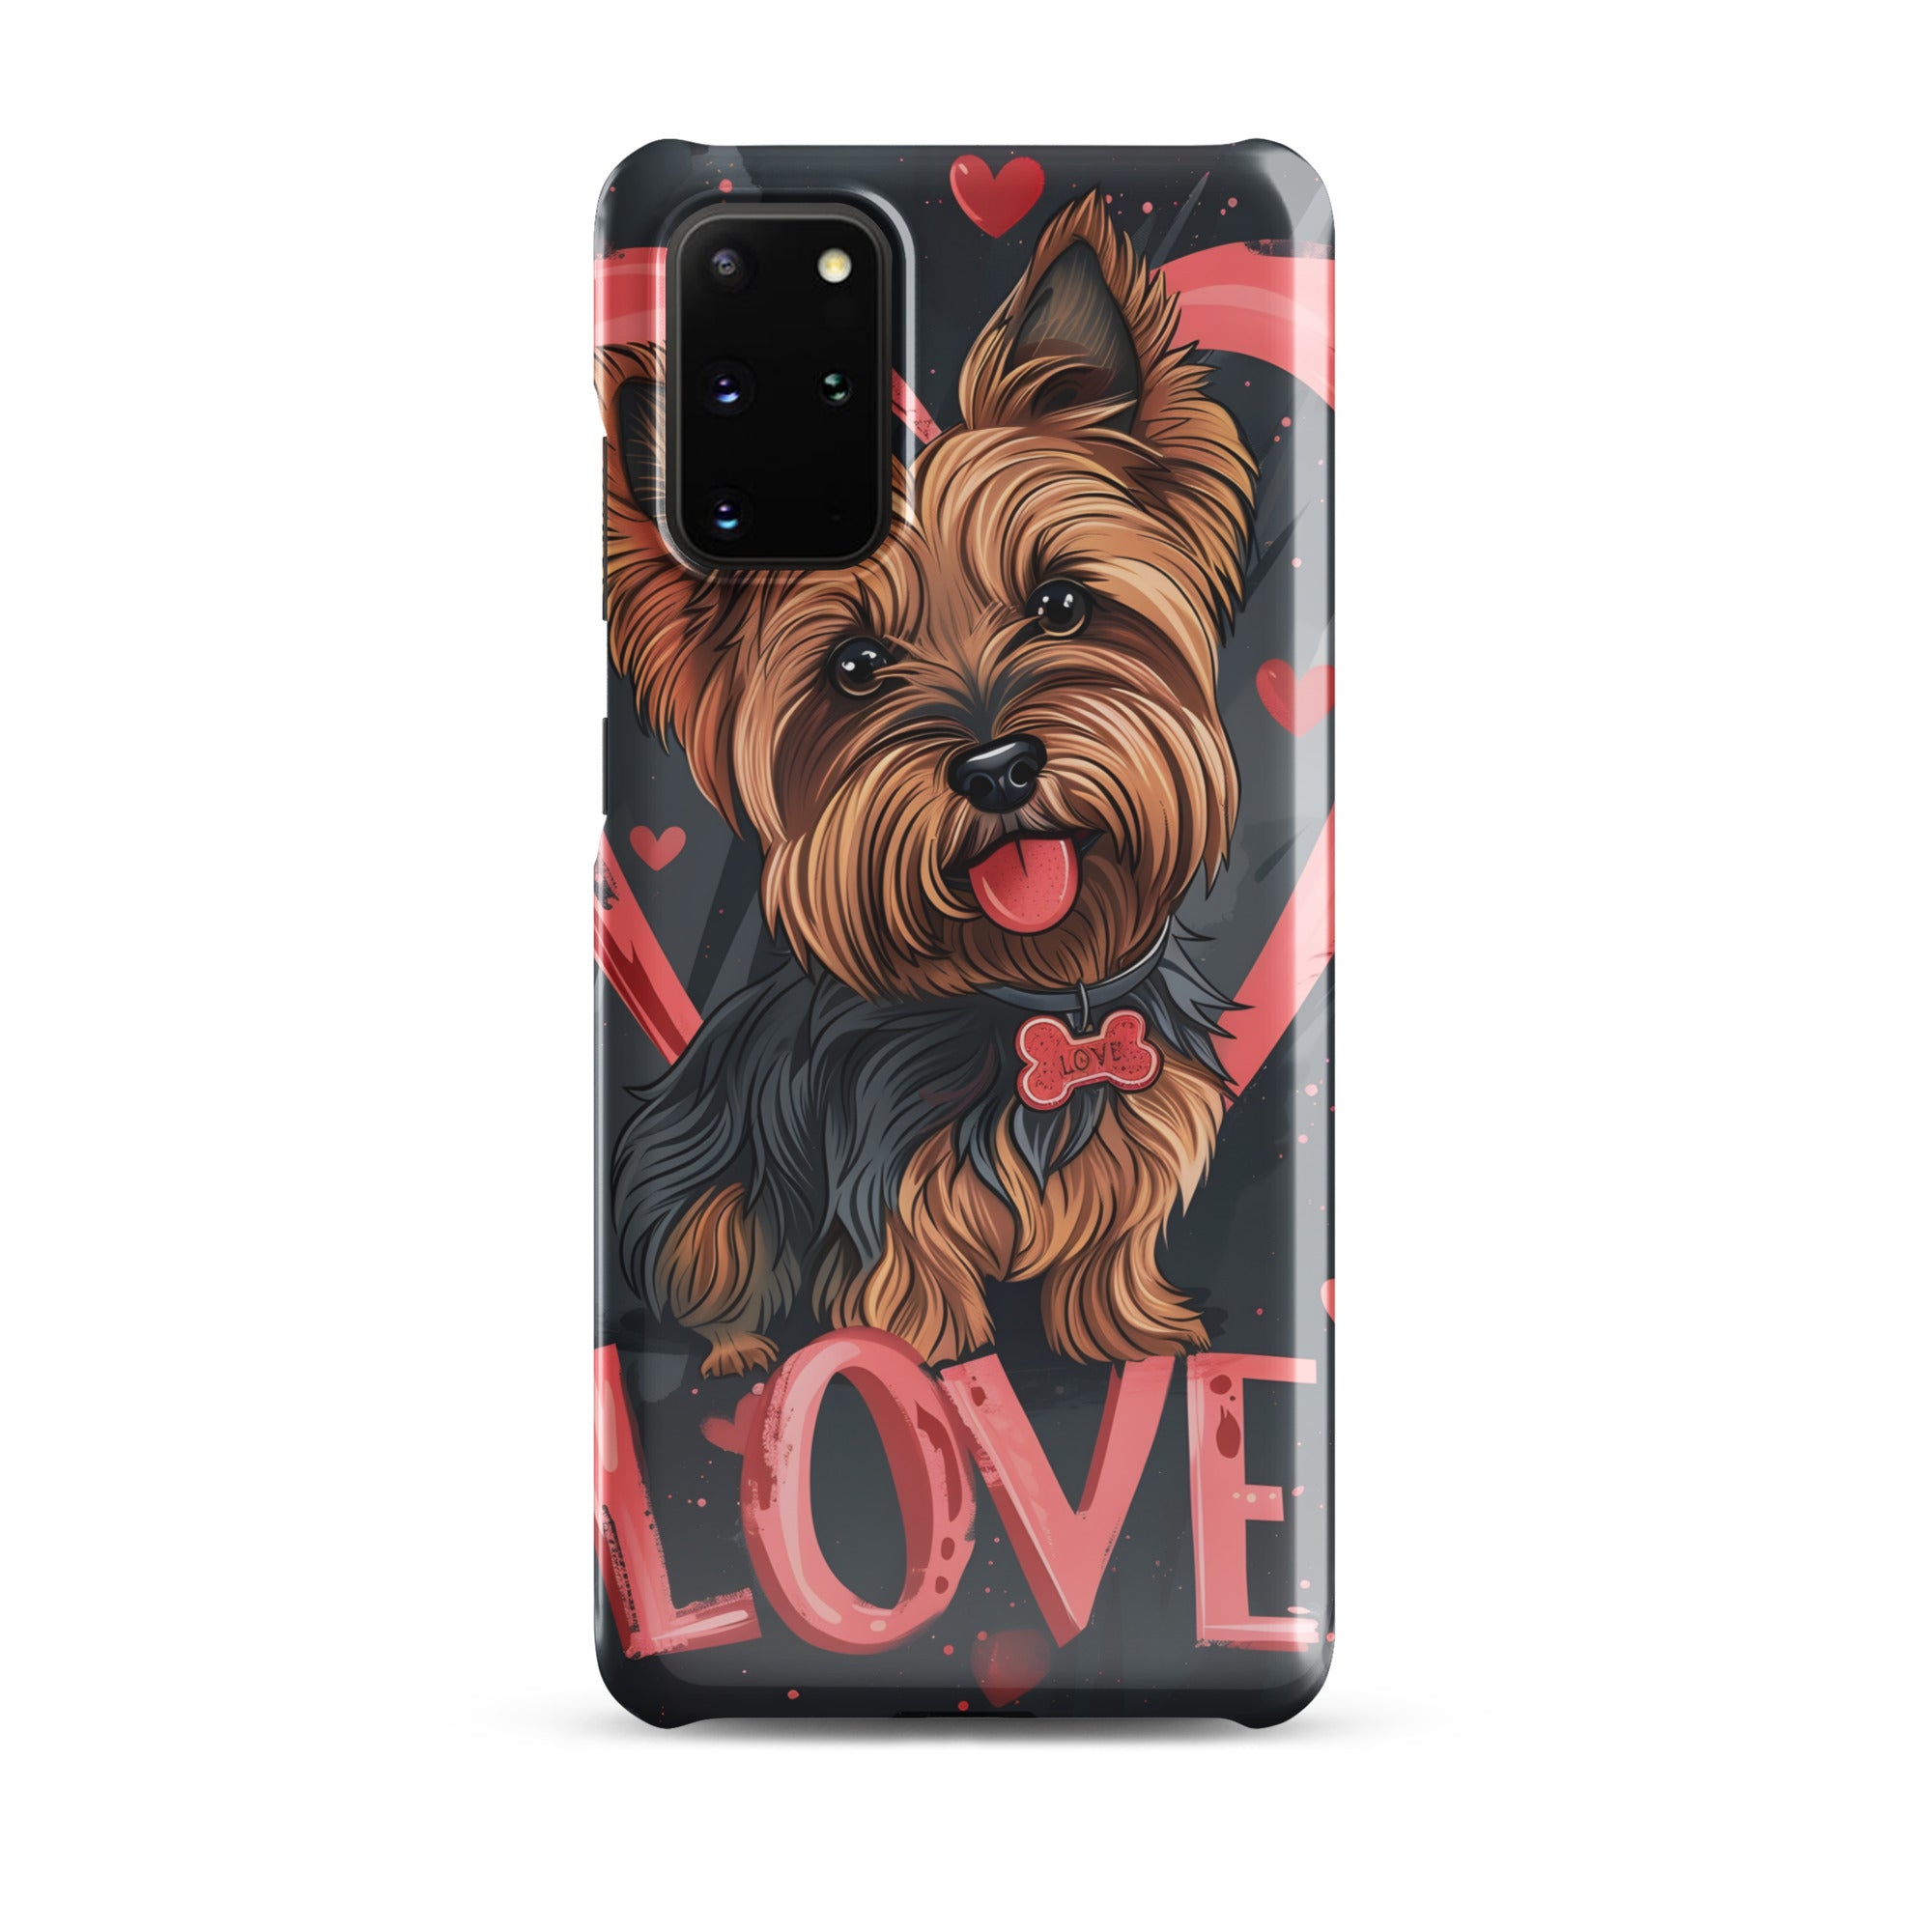 Yorkshire Terrier Snap case for Samsung®